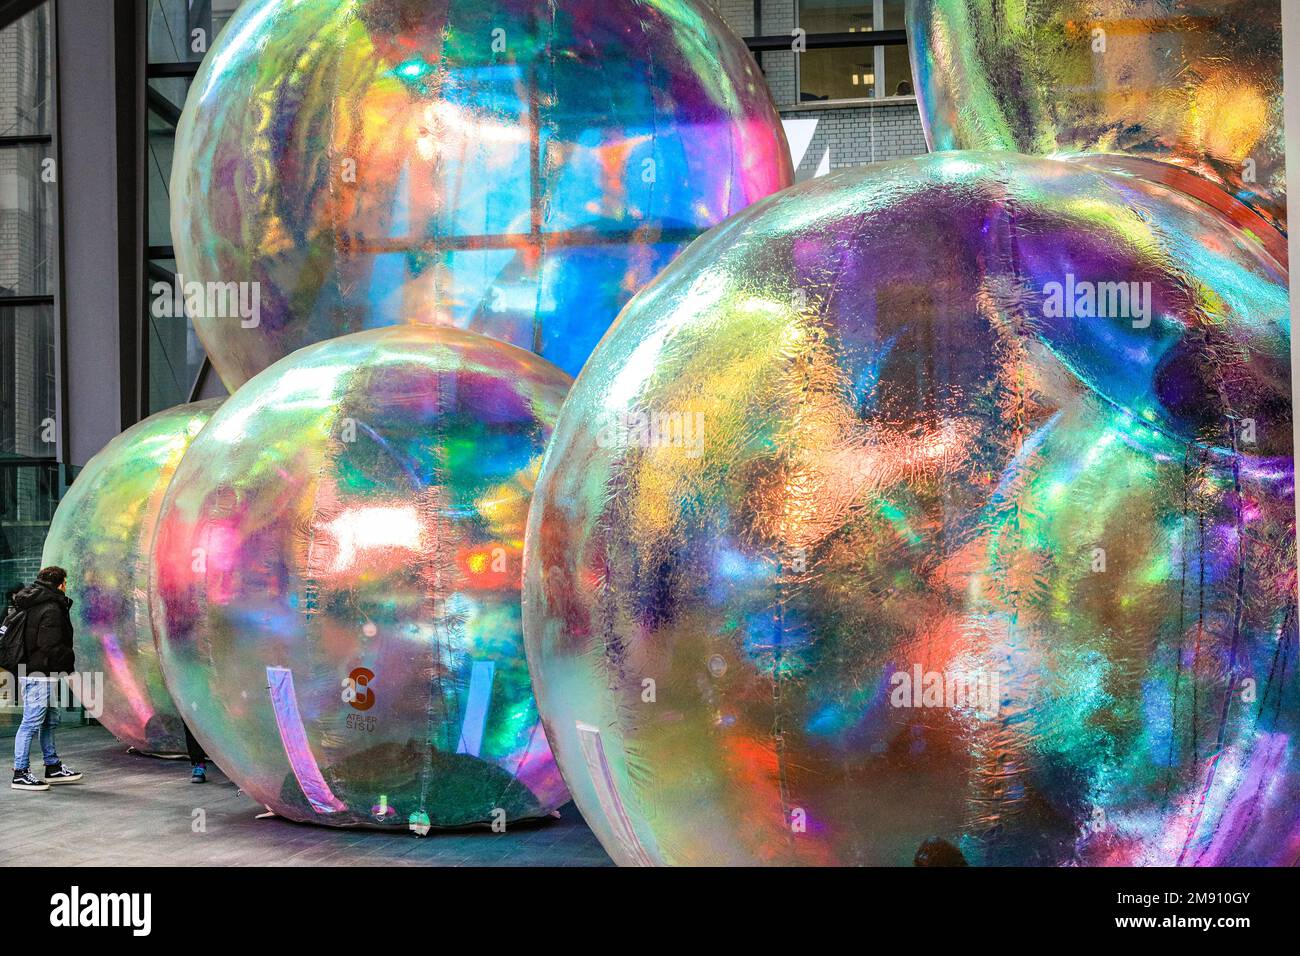 London, UK. 16th Jan, 2023. The public wander around the installation. New outdoor art installation 'Evanescent' by Atelier Sisu brings light to the City of London. The iridescent bubbles, which the public can walk under and around, are illuminated at night and are installed outside the iconic Leadenhall Building until the 10th of February. The installation, shown in London for the first time after its premiere in Australia. Evanescent by Atelier Sisu has been commissioned by ECBID and produced by Festival.org. Credit: Imageplotter/Alamy Live News Stock Photo